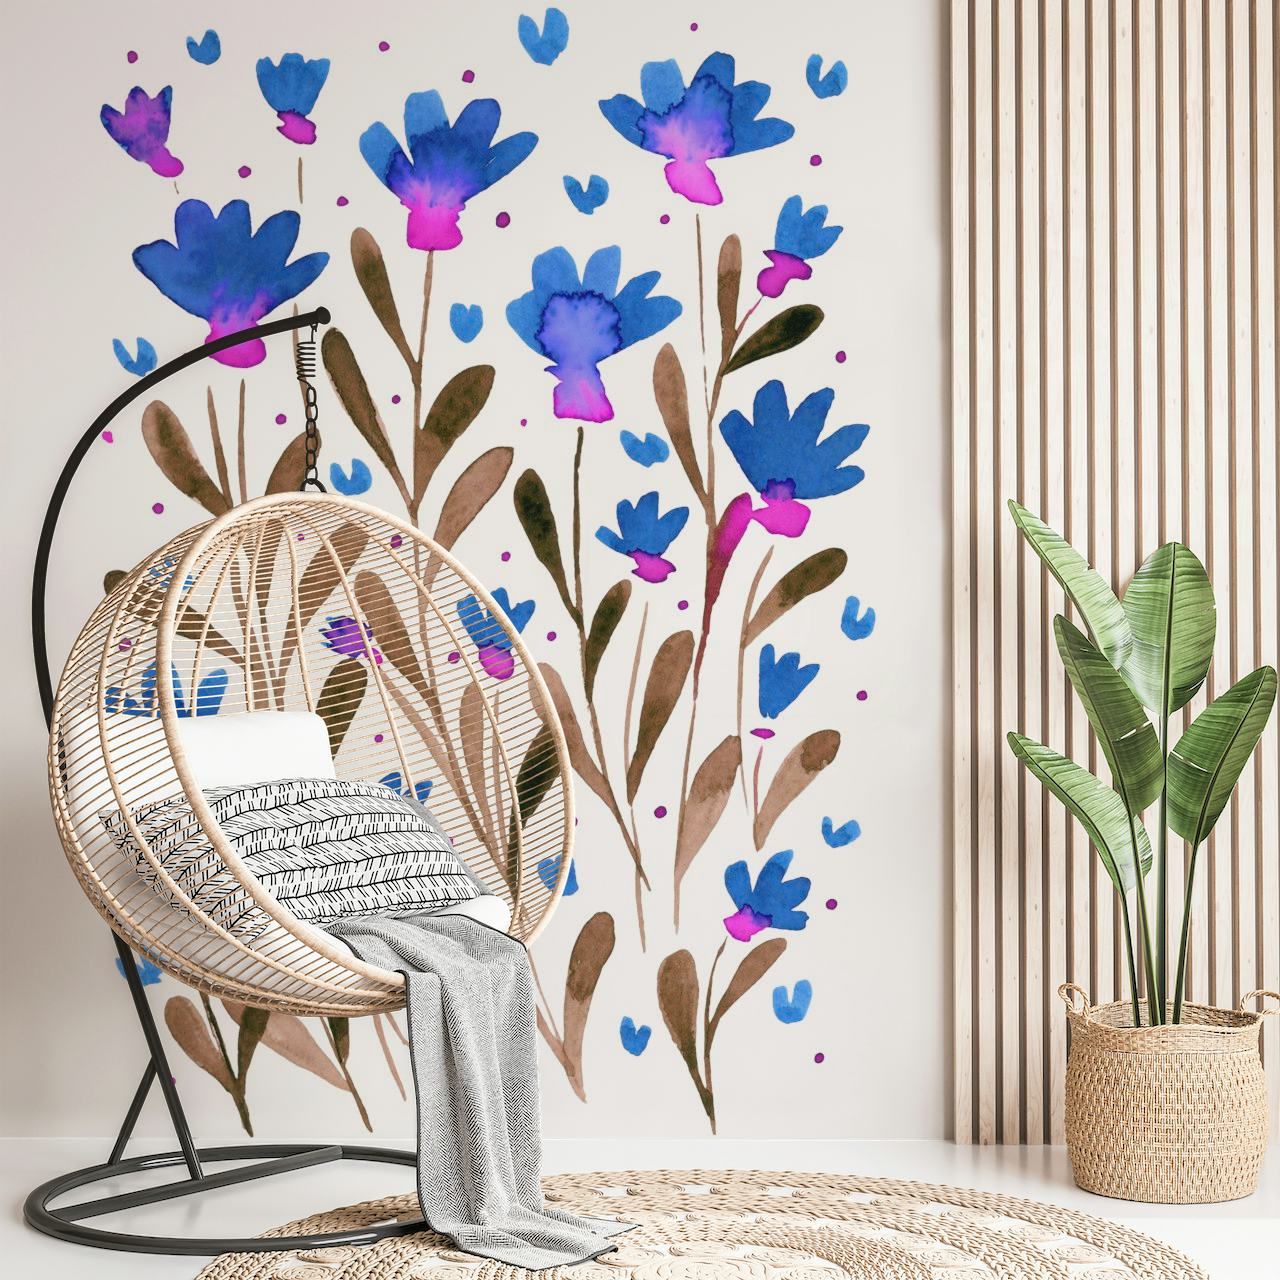 Forget me not flowers - blue and pink wallpaper